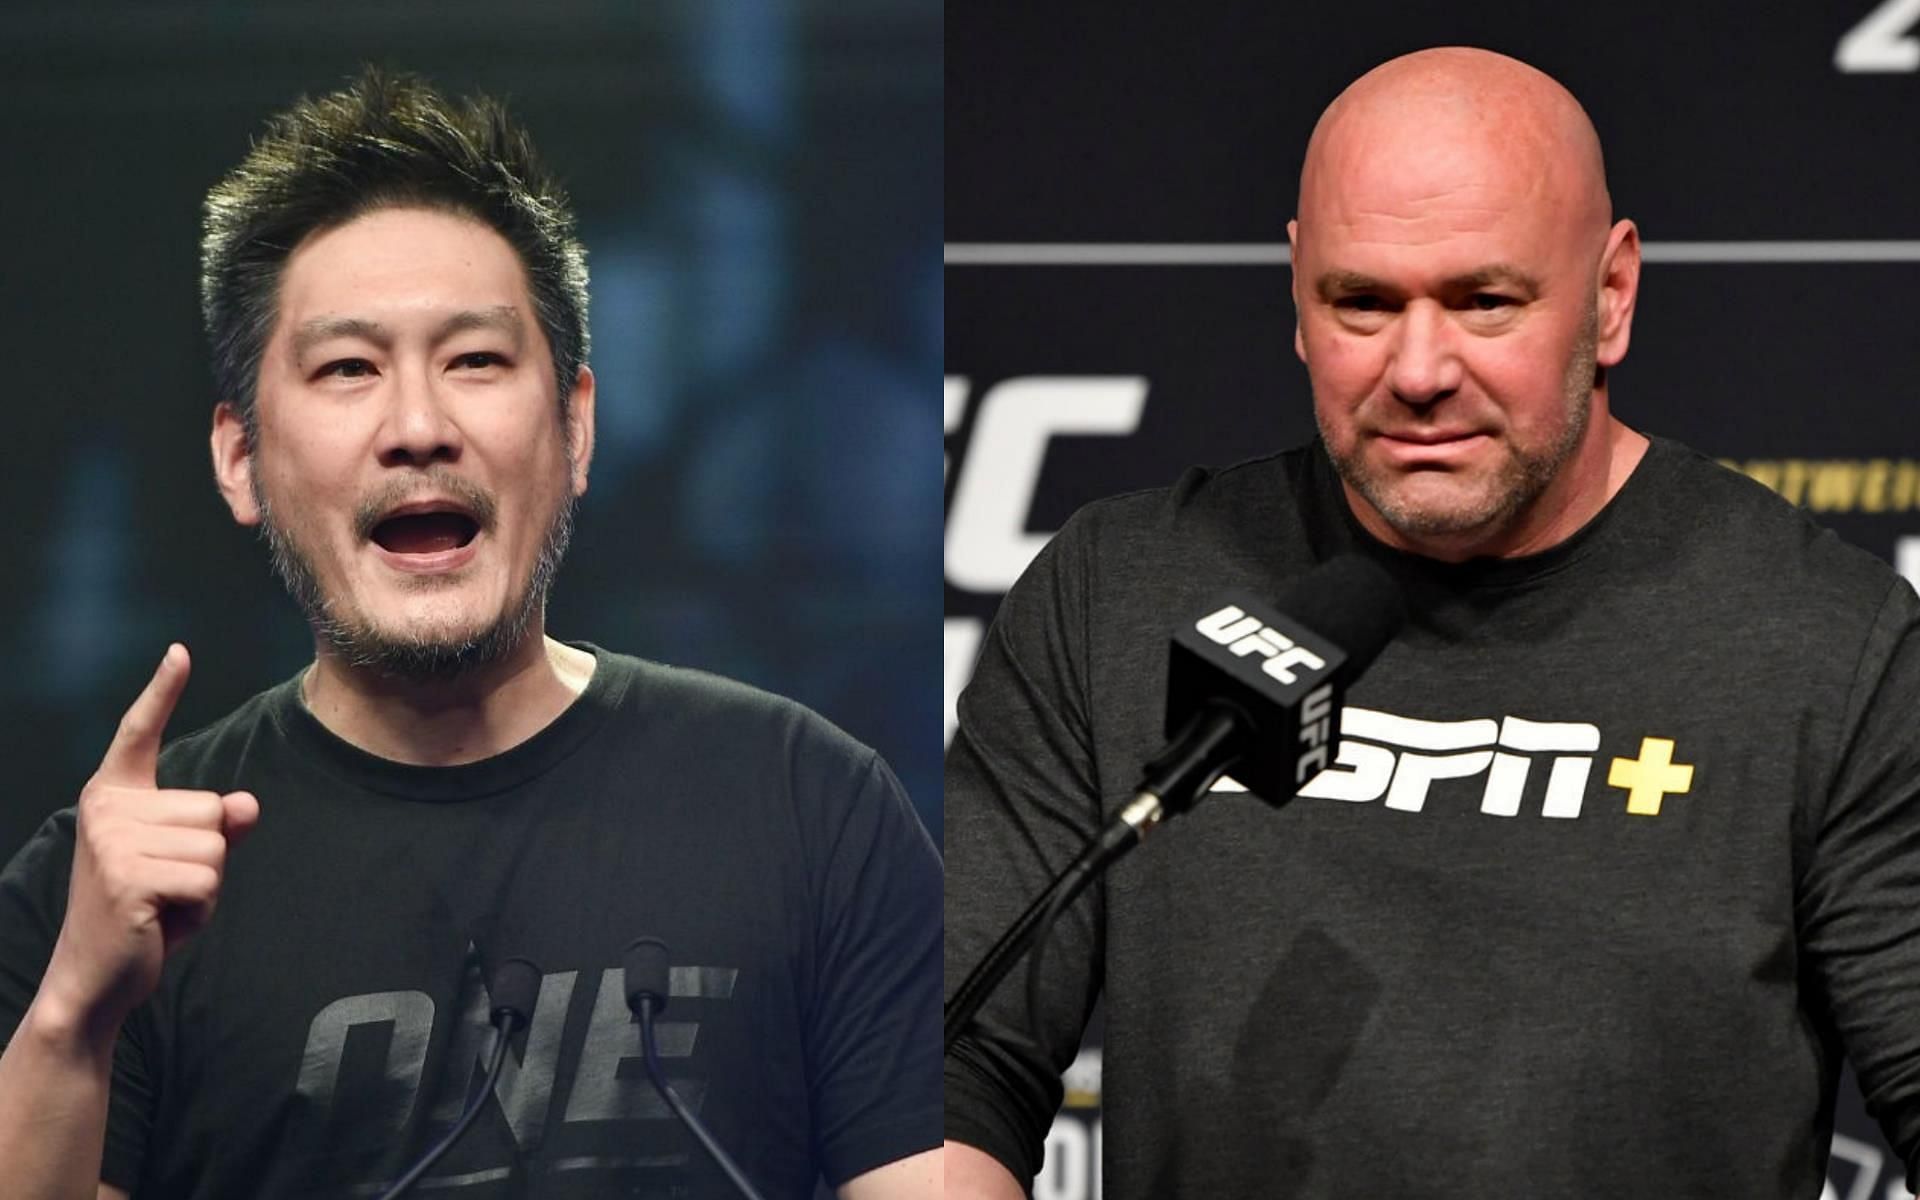 Chatri Sityodtong (Left) has &quot;stylistic differences&quot; with Dana White (Right) | [Photos: ONE Championship/The New York Times]